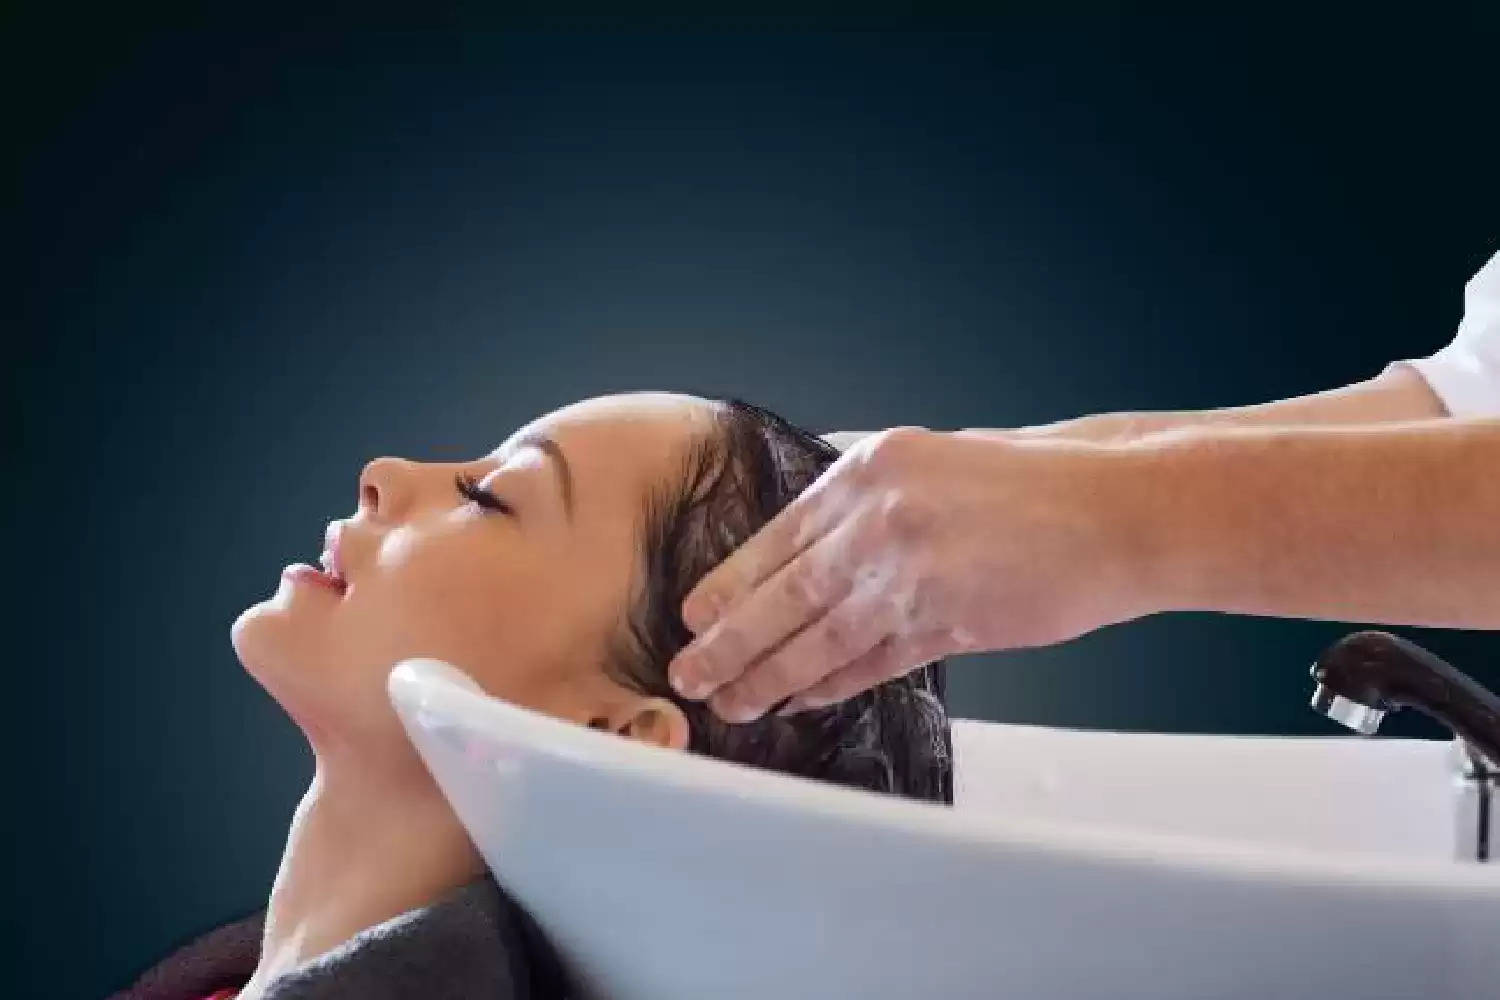 Hair spa: Does hair spa really make hair beautiful? Click here to know